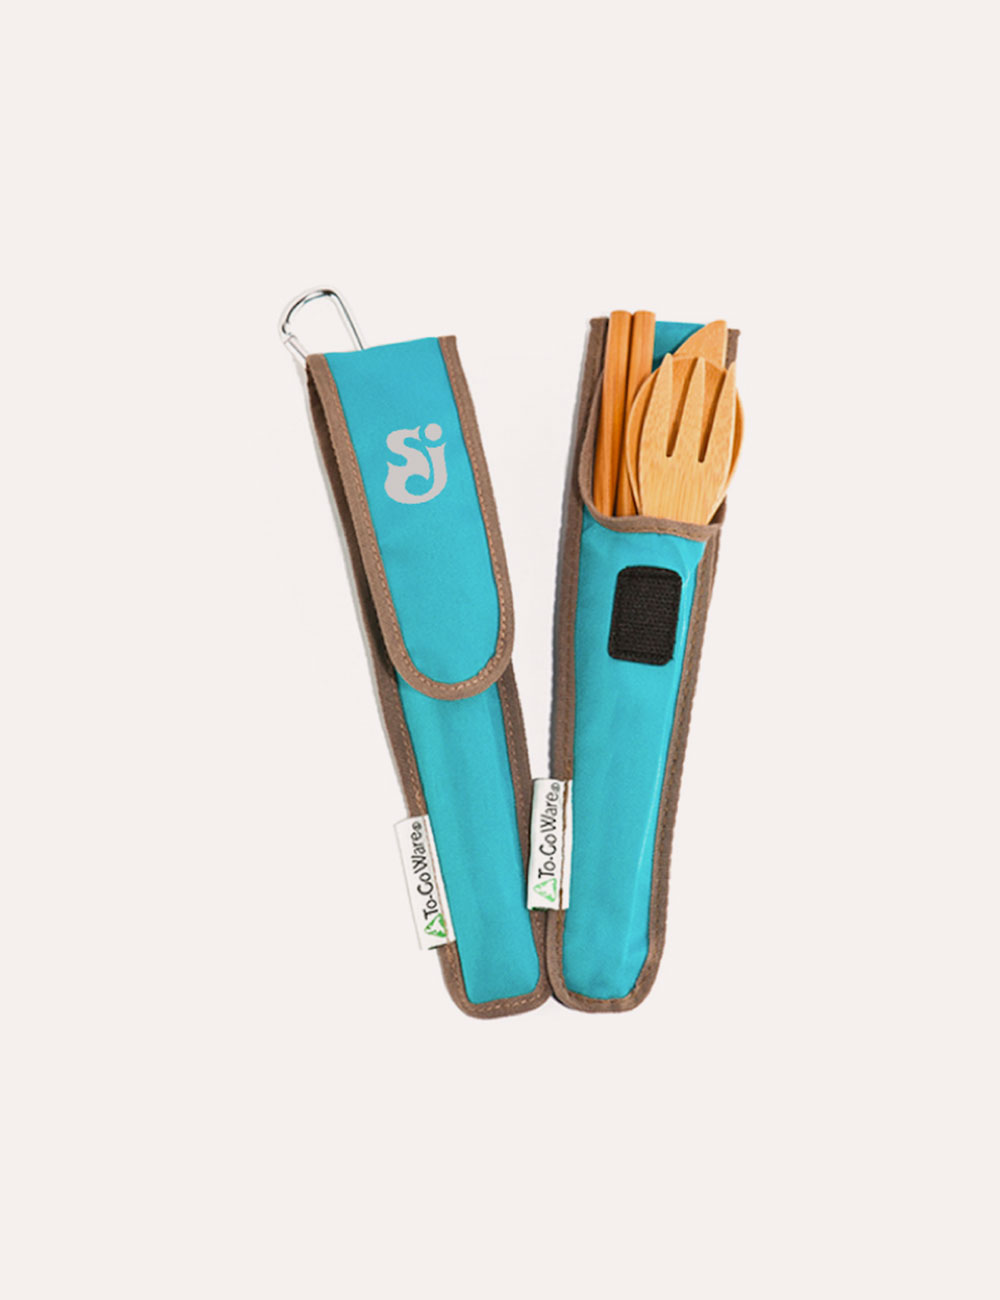 The String Cheese Incident - Merch - Bamboo Utensil Set